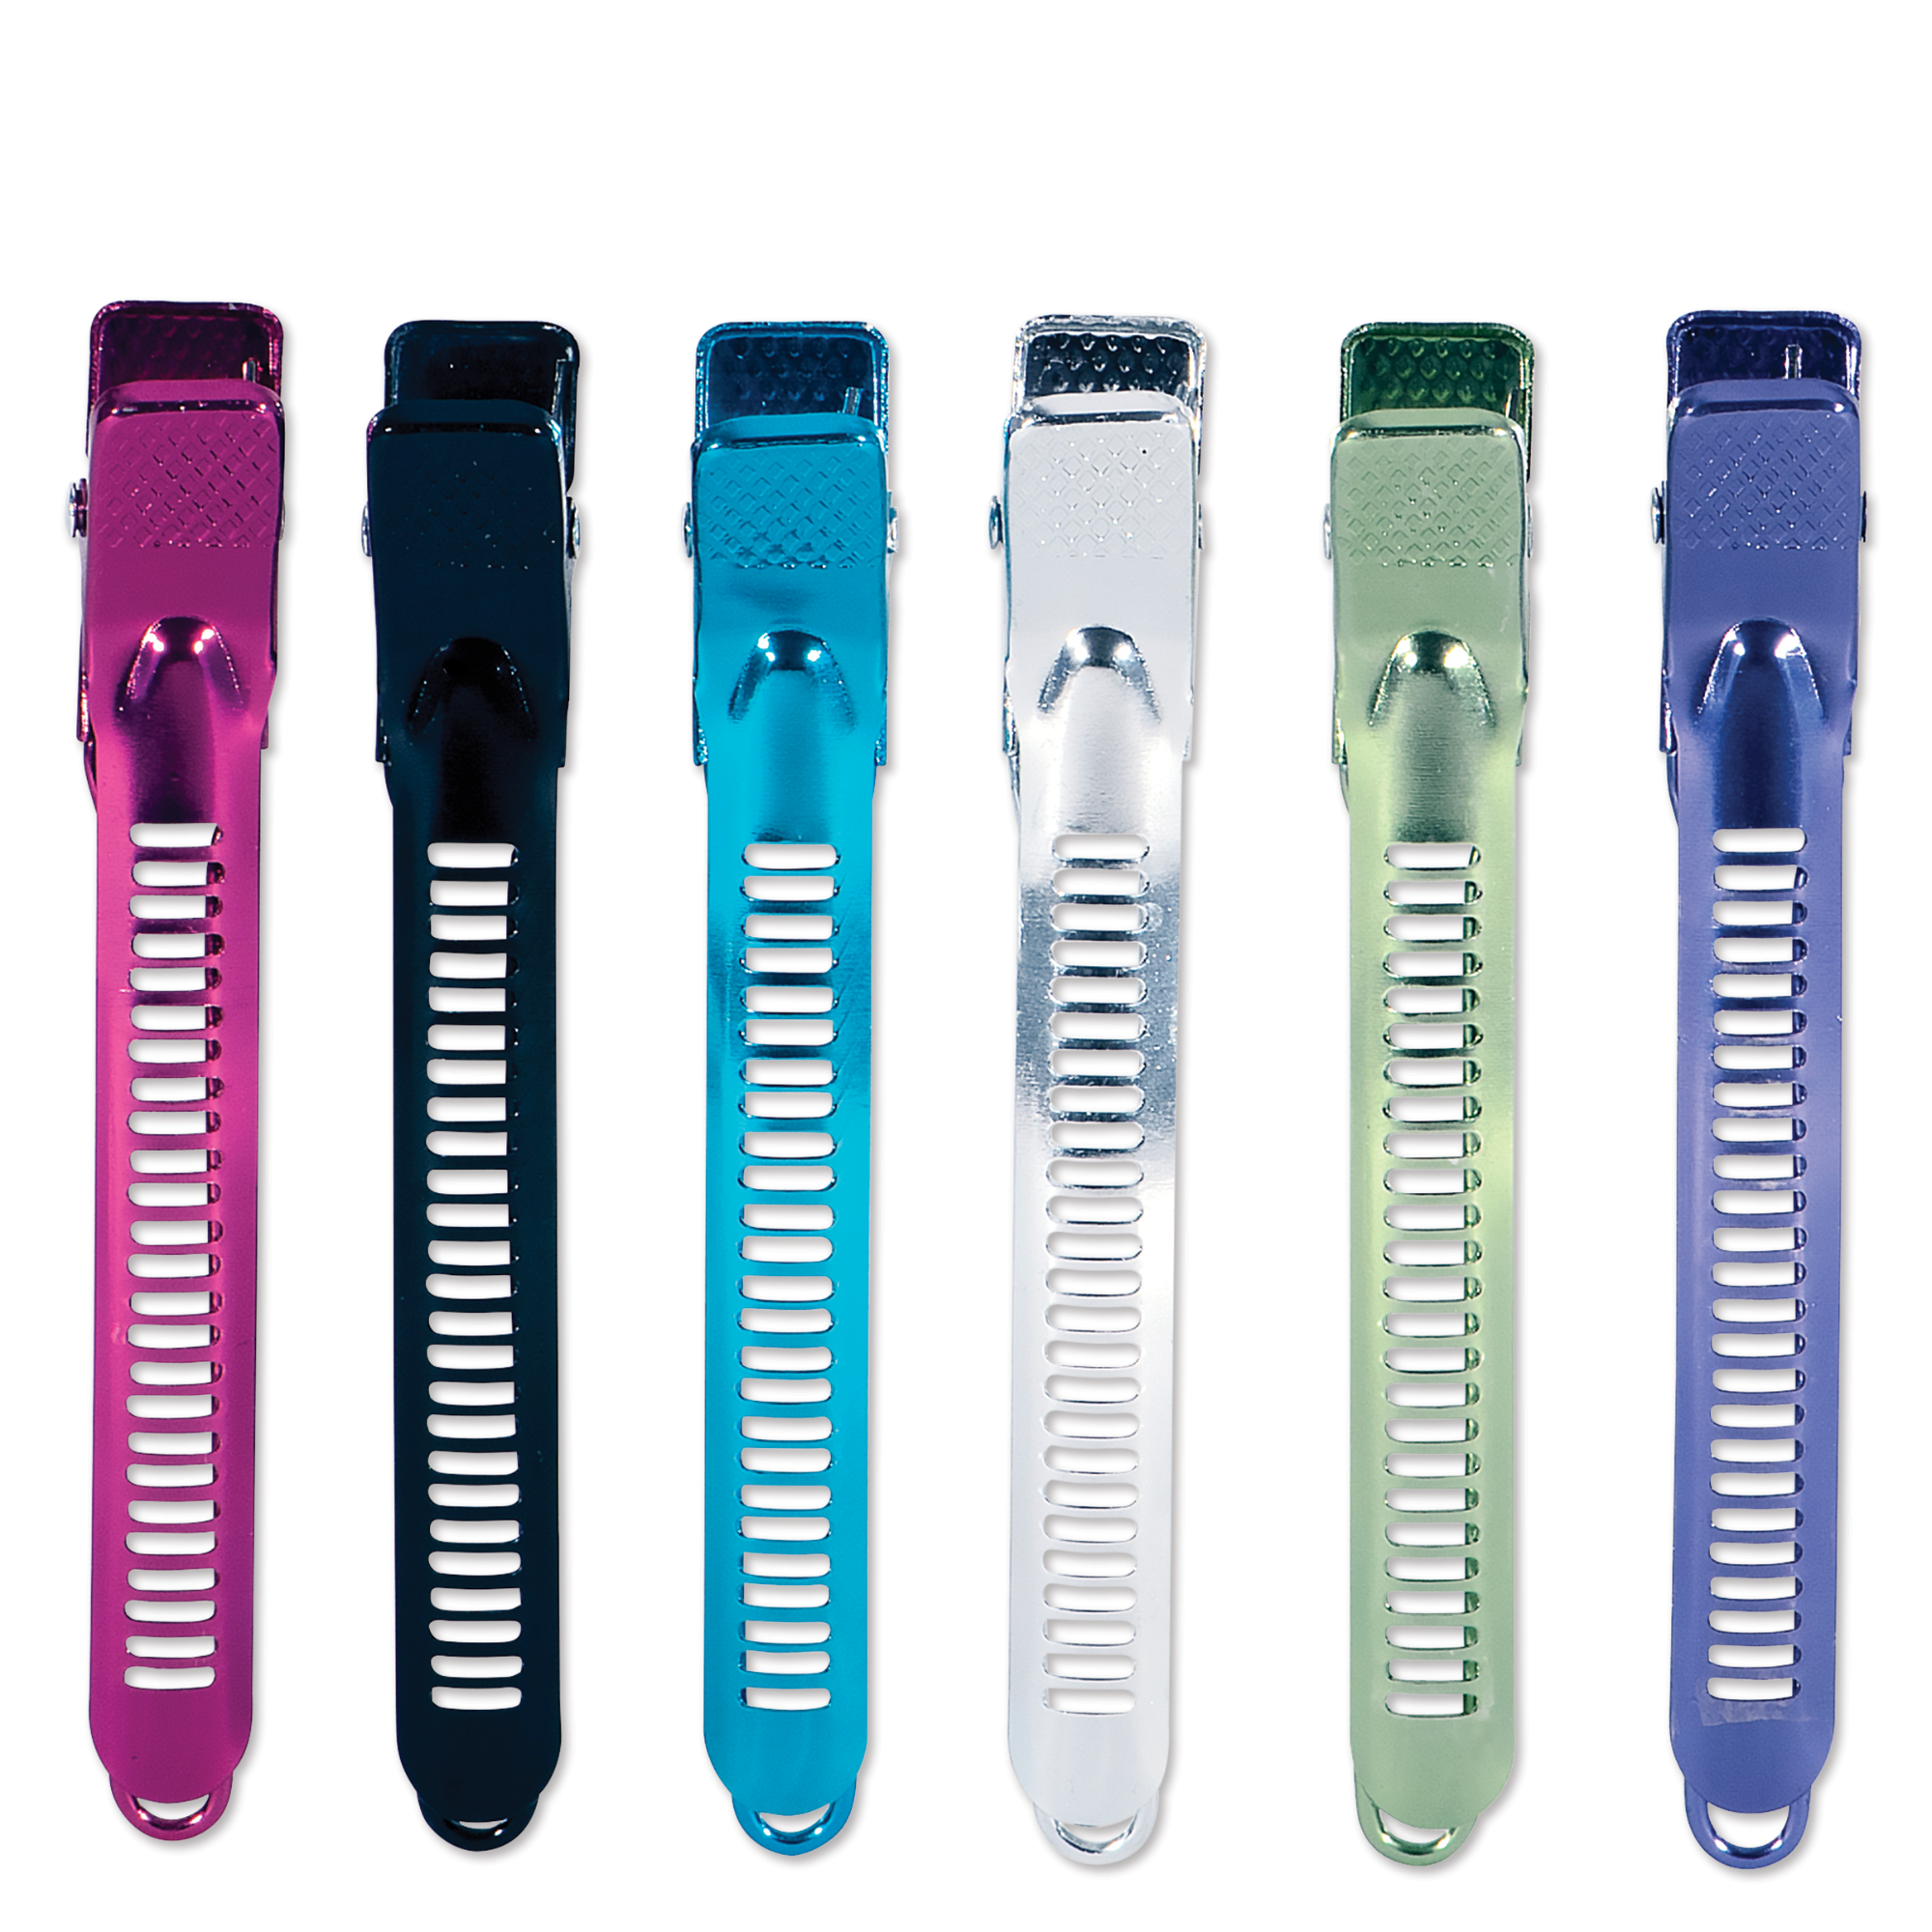 Super Grip Clips In Assorted Colors - 4"